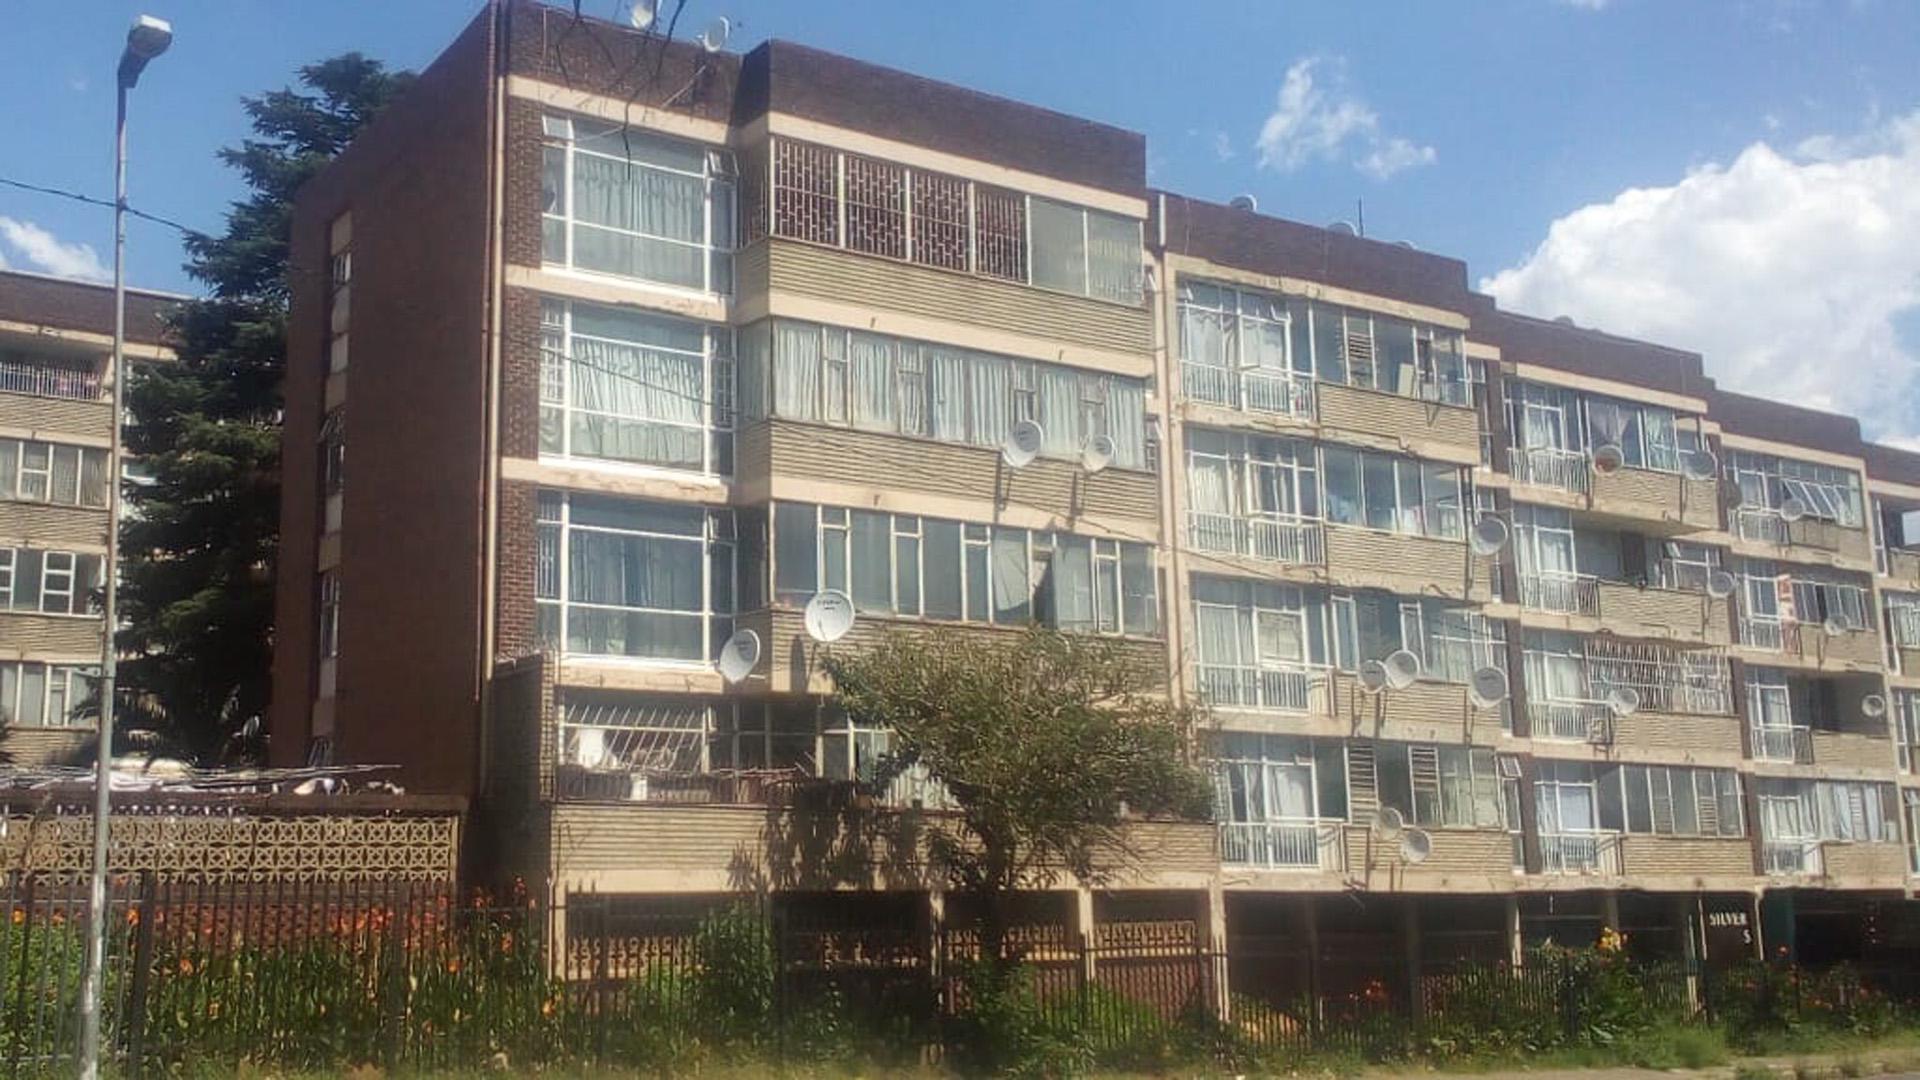 FNB Quick Sell 2 Bedroom Sectional Title for Sale in Berea -